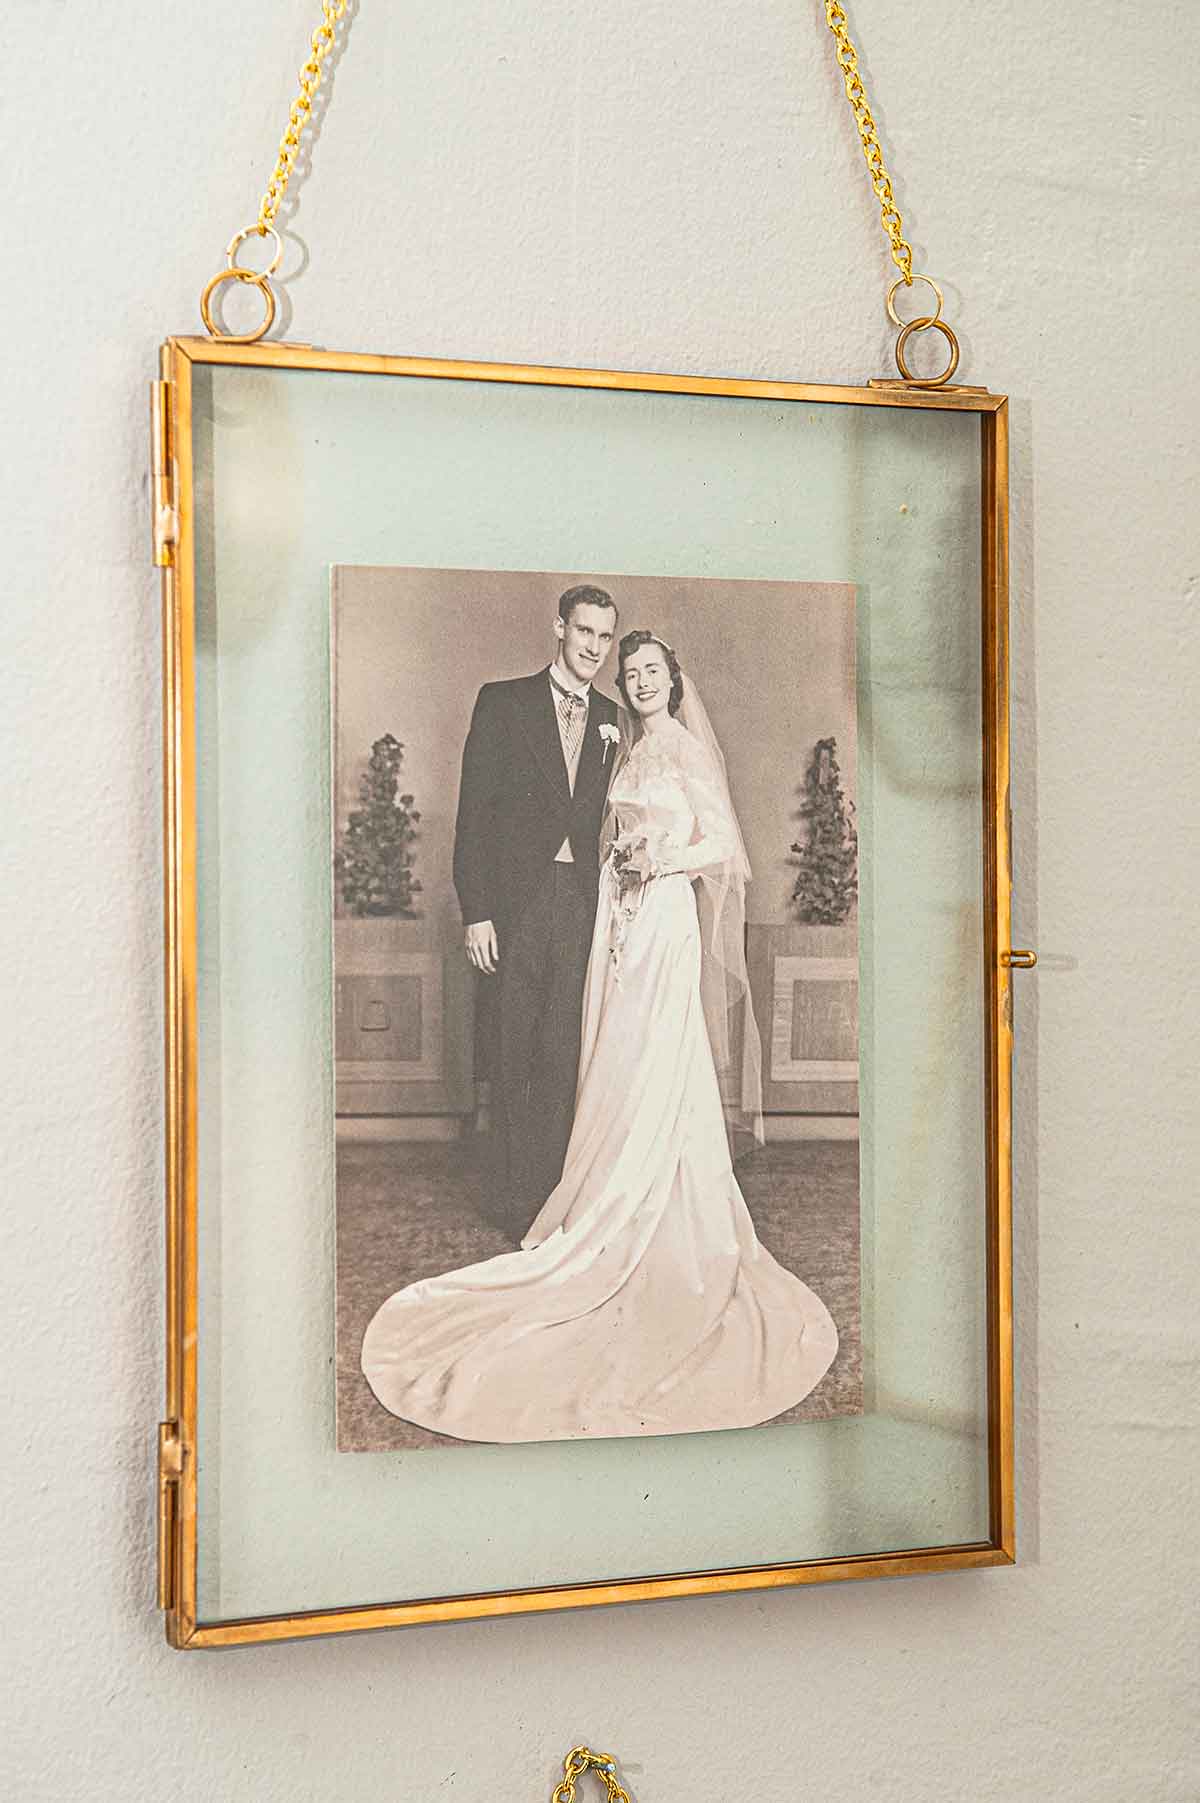 A vintage wedding photo in a clear frame on a wall.